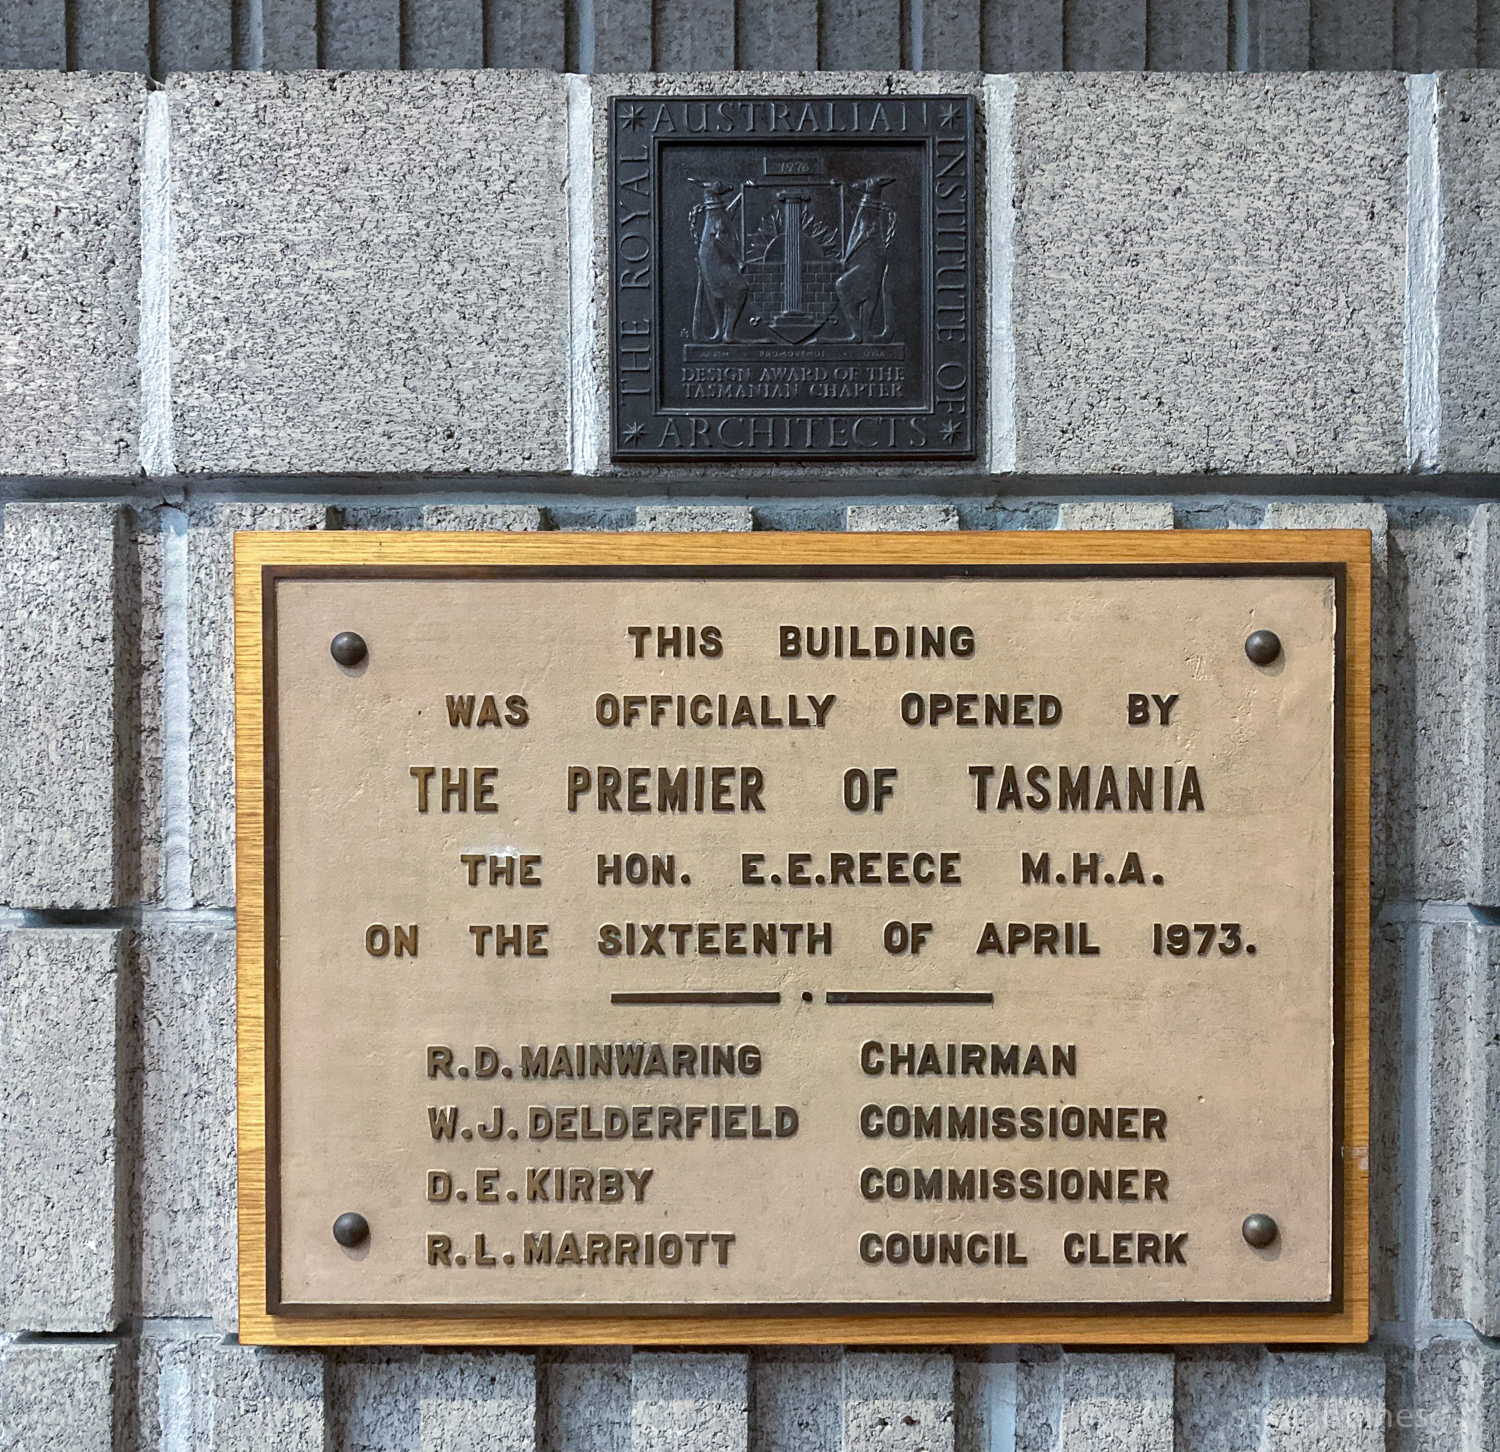 Plaque commemorating the opening of the building by the Premier of Tasmania the Hon E E Reece MHA on 16 April 1973.